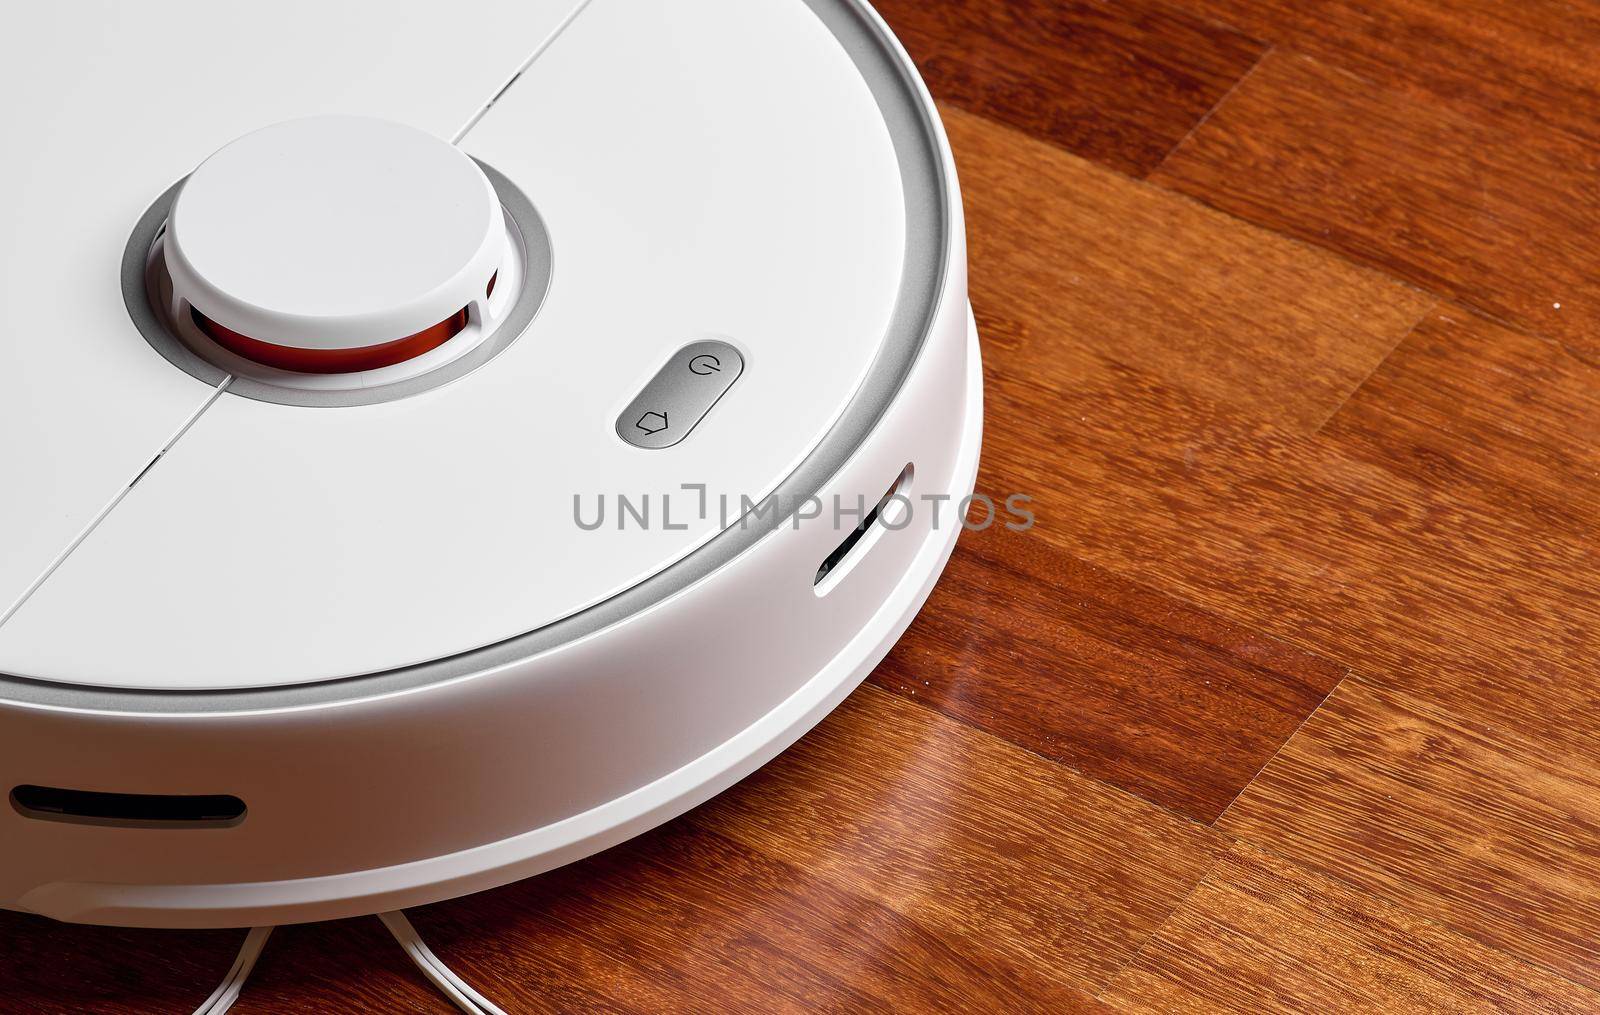 Smart Robot Vacuum Cleaner on wood floor. Robot vacuum cleaner performs automatic cleaning of the apartment at a certain time. Smart home by EvgeniyQW